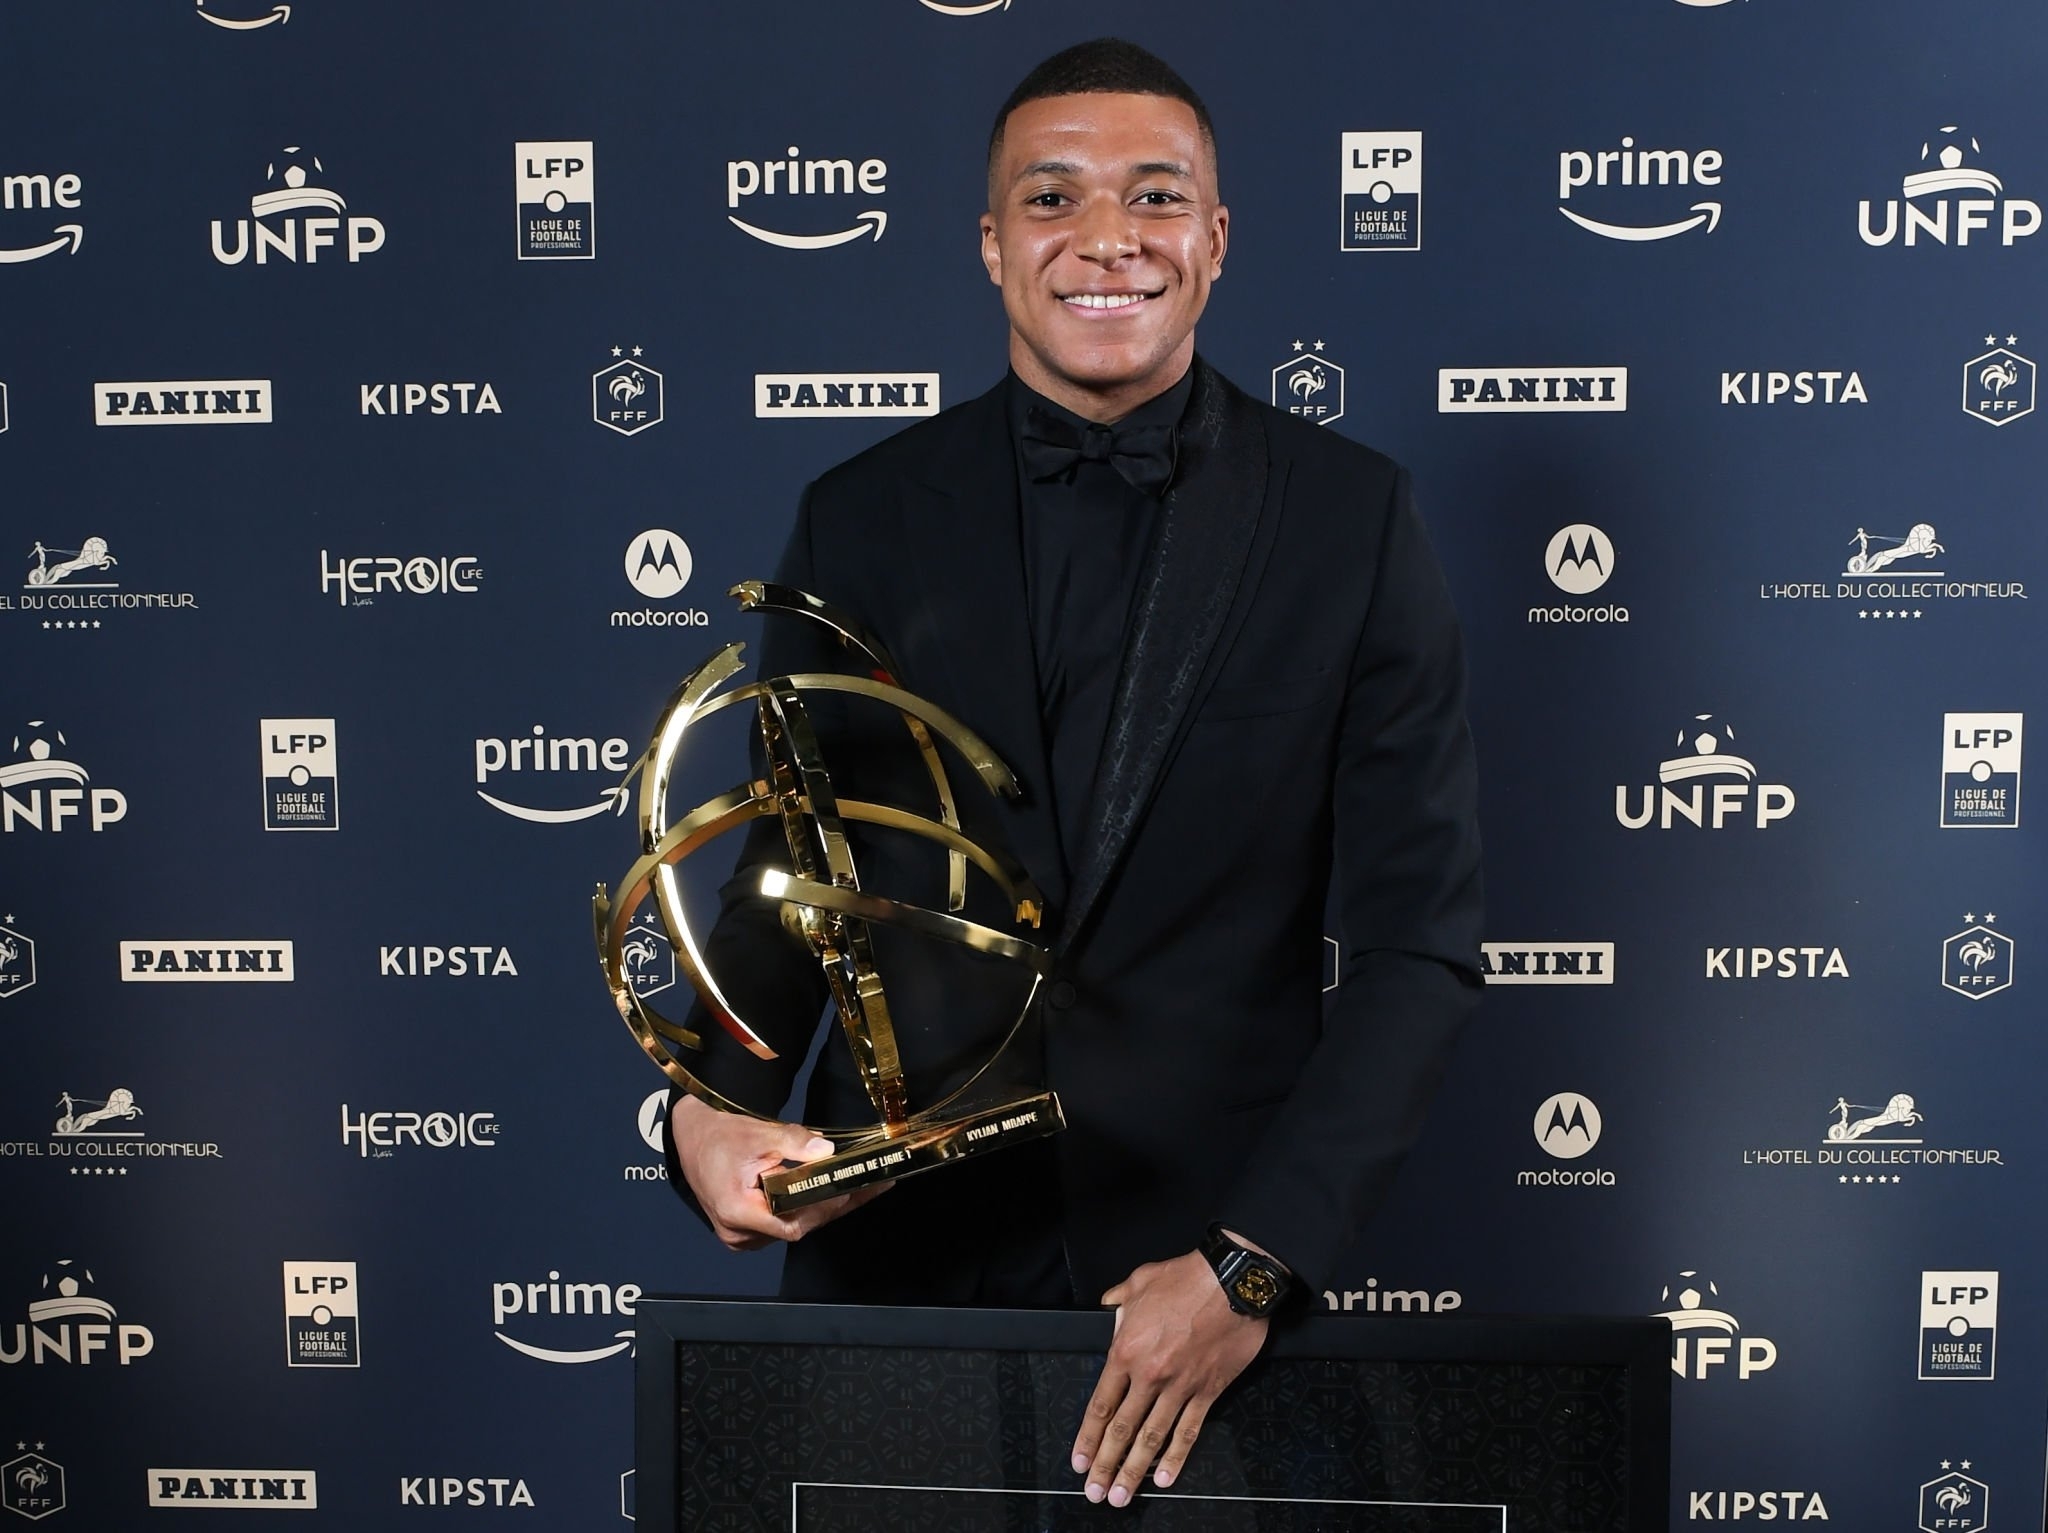 Mbappe transfer, Kylian Mbappe will not join Real Madrid, PSG transfer, Ligue 1 Player of the Year, Mbappe to Real Madrid, Messi to Barcelona, Lionel Messi